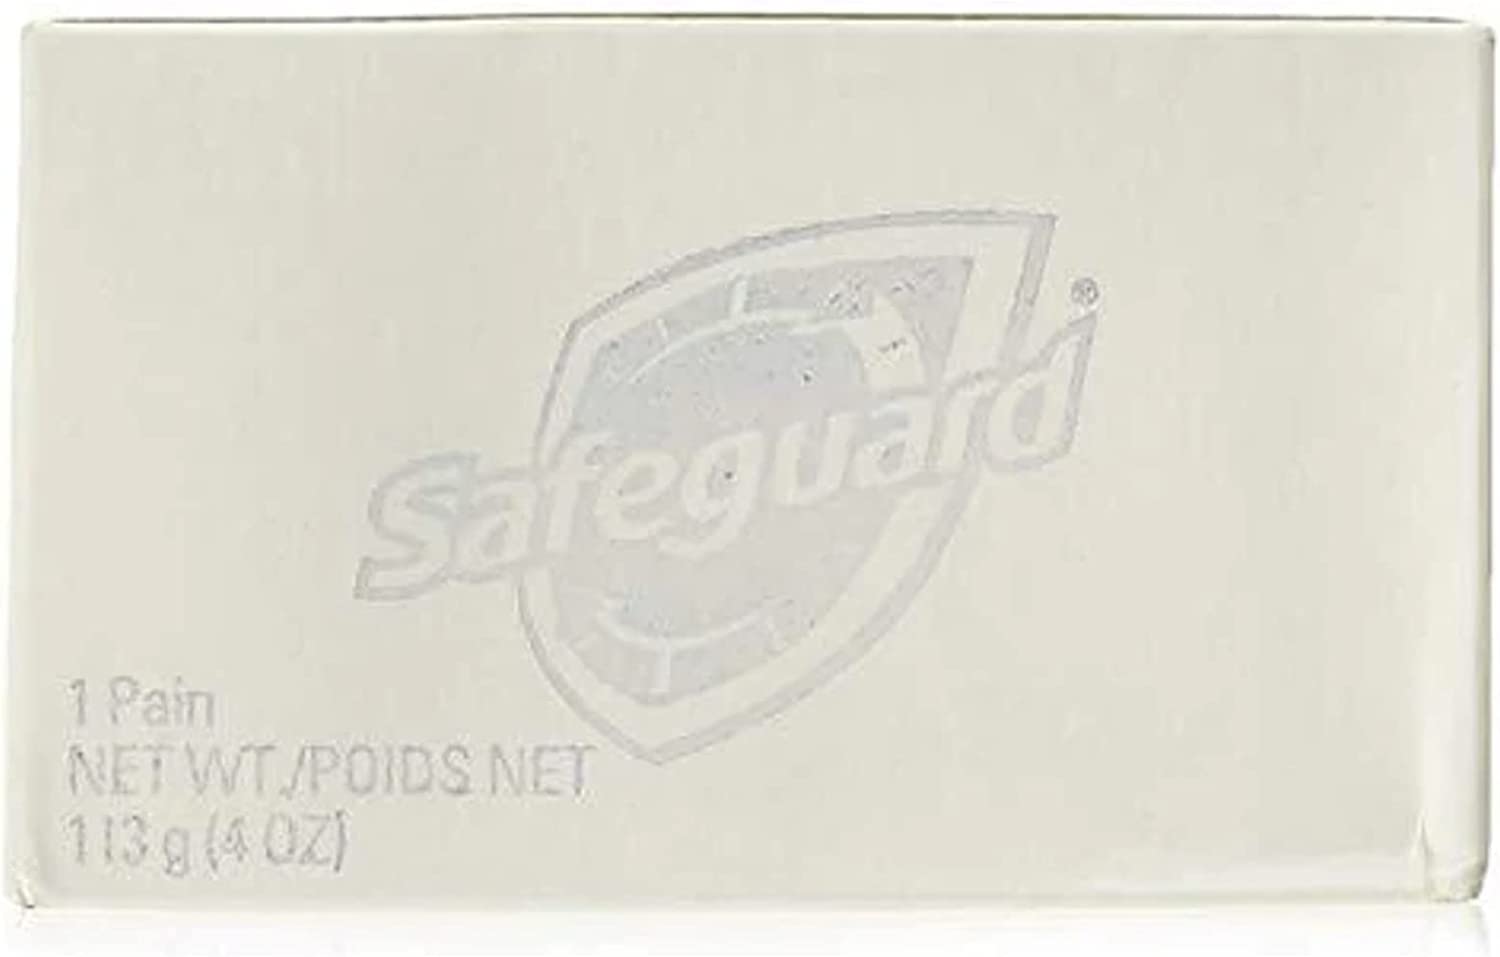 Safeguard 14 Bars 4oz (113g) Each Beige Washes Away Bacteria Antibacterial Soap Bar